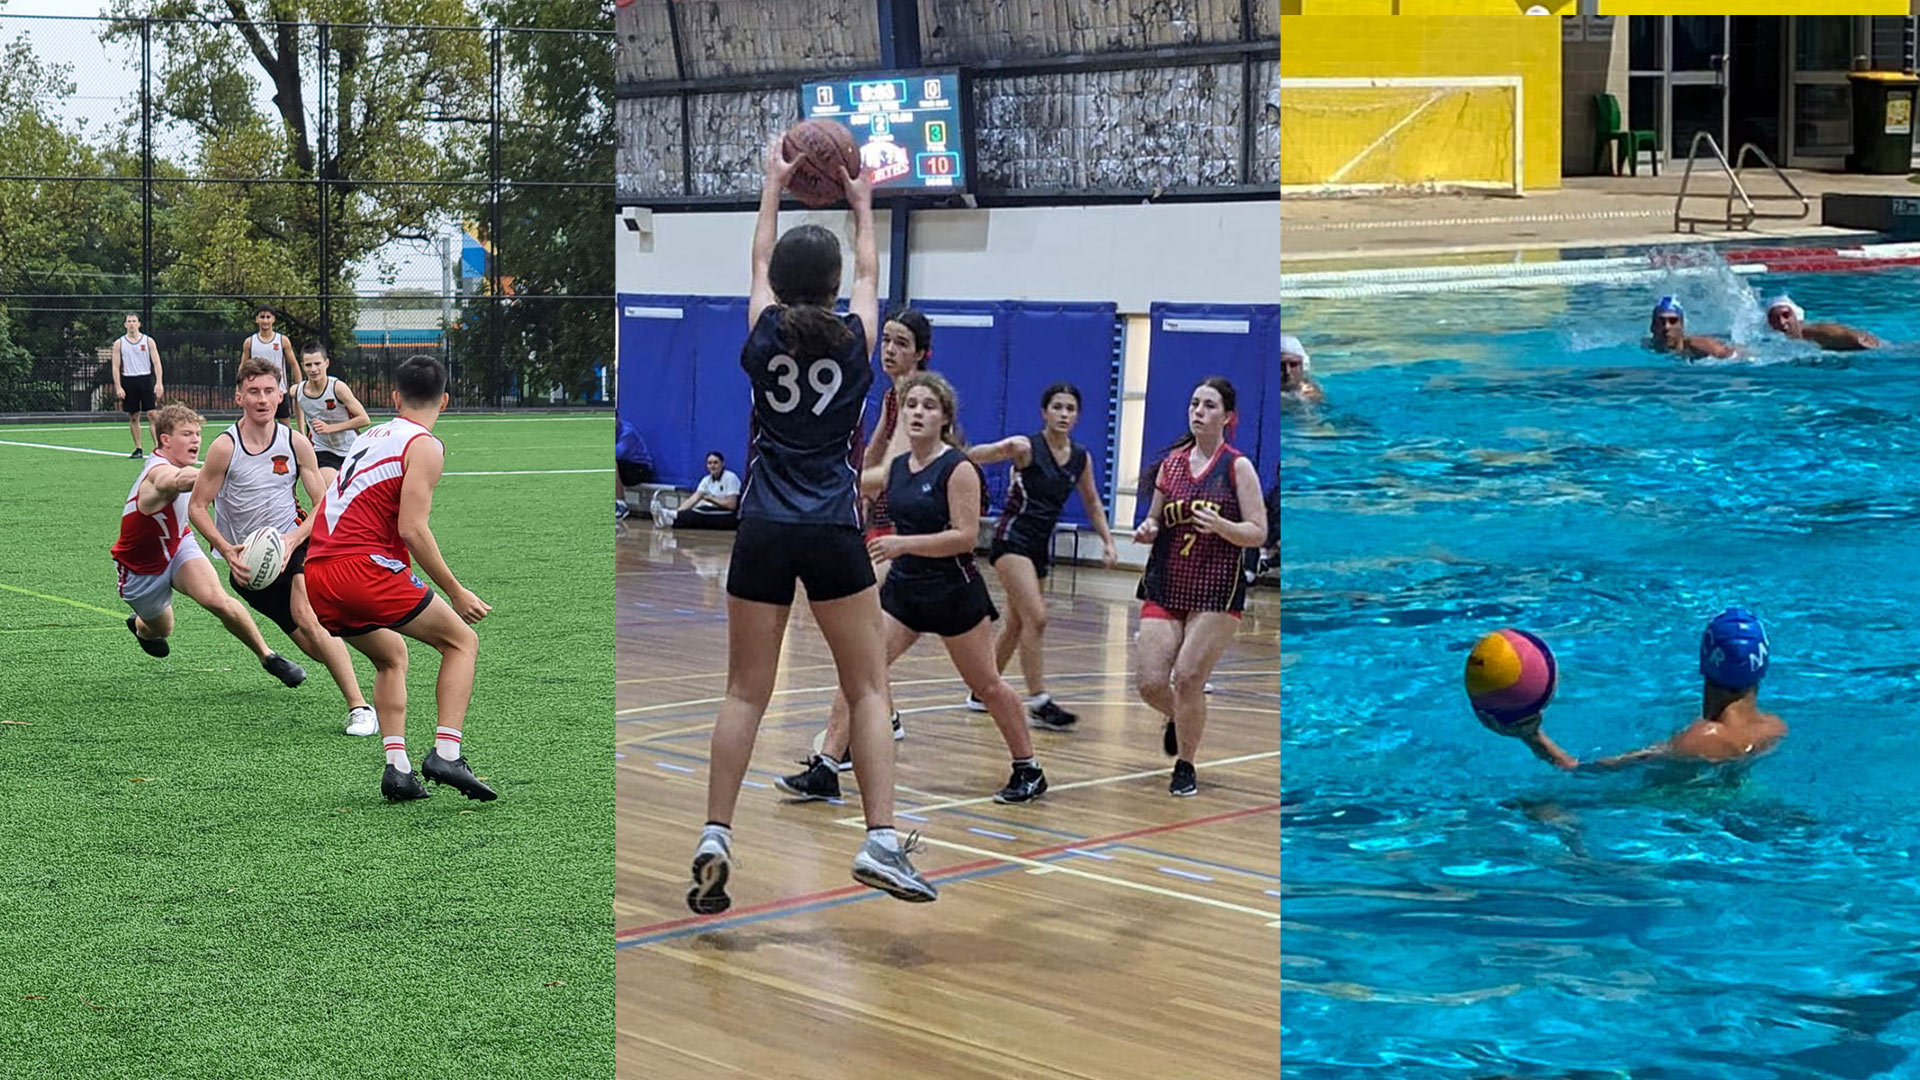 Touch Football, Basketball and Water Polo